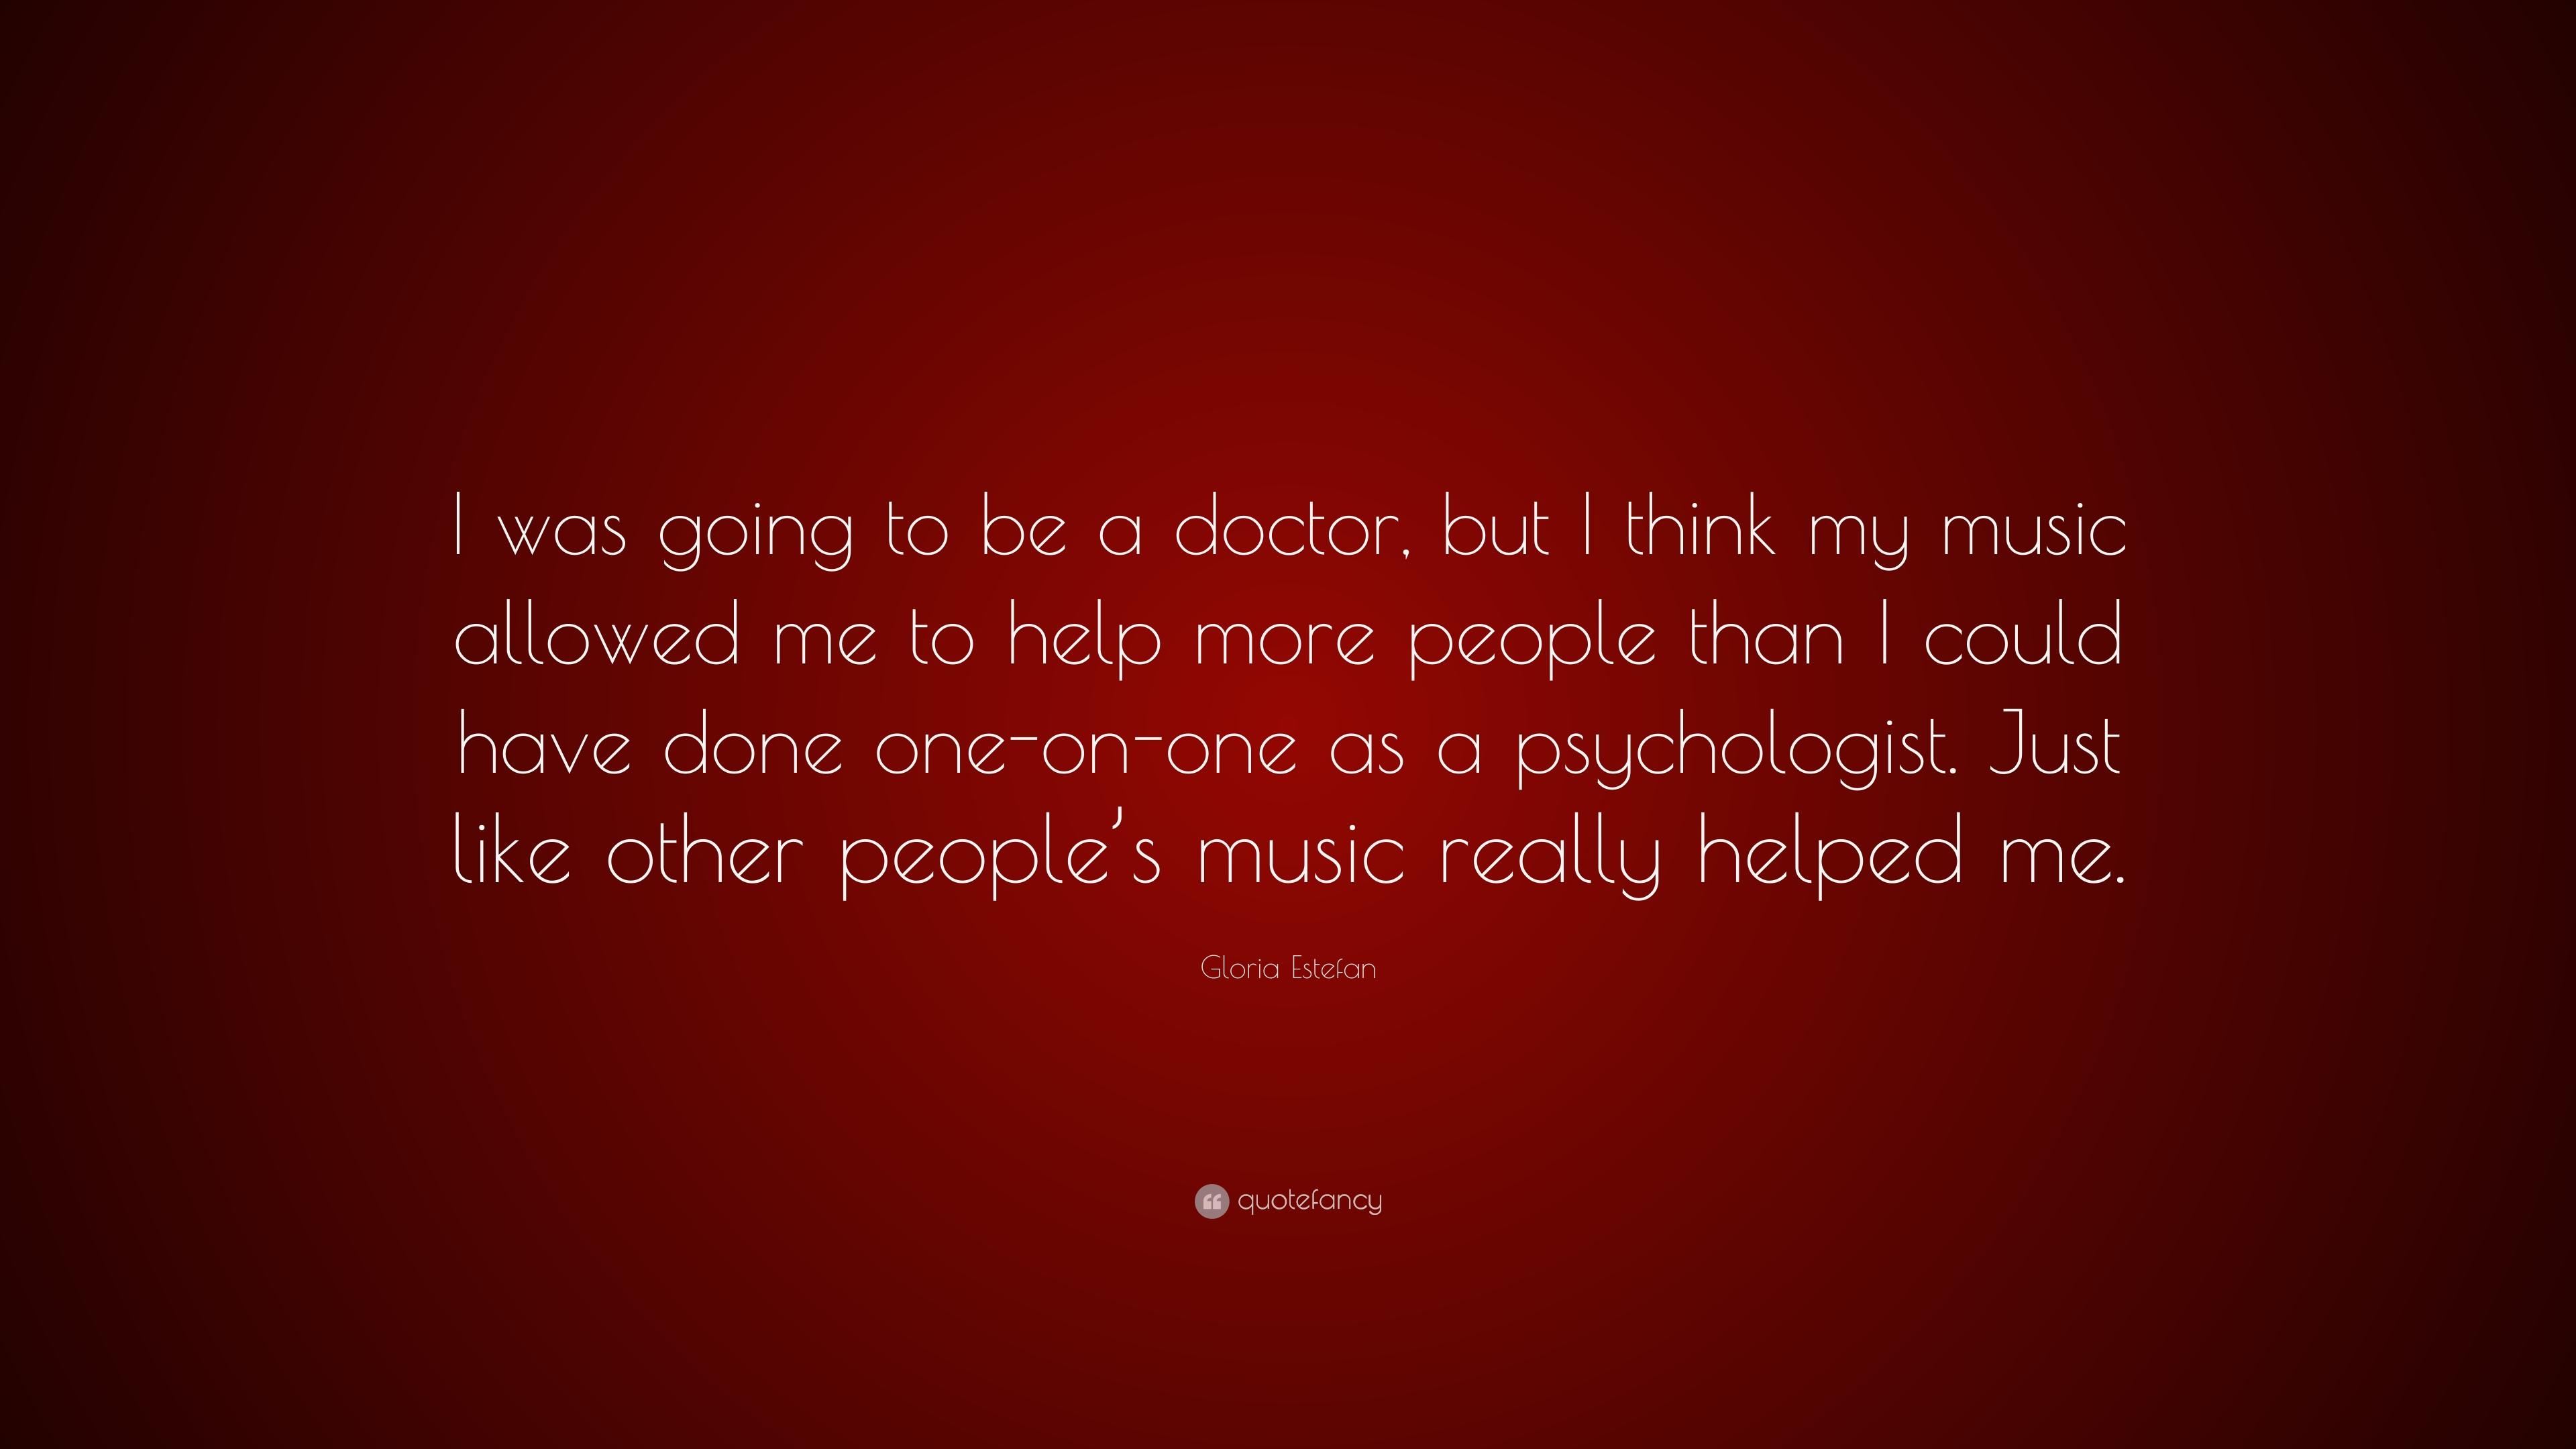 Gloria Estefan Quote: “I was going to be a doctor, but I think my